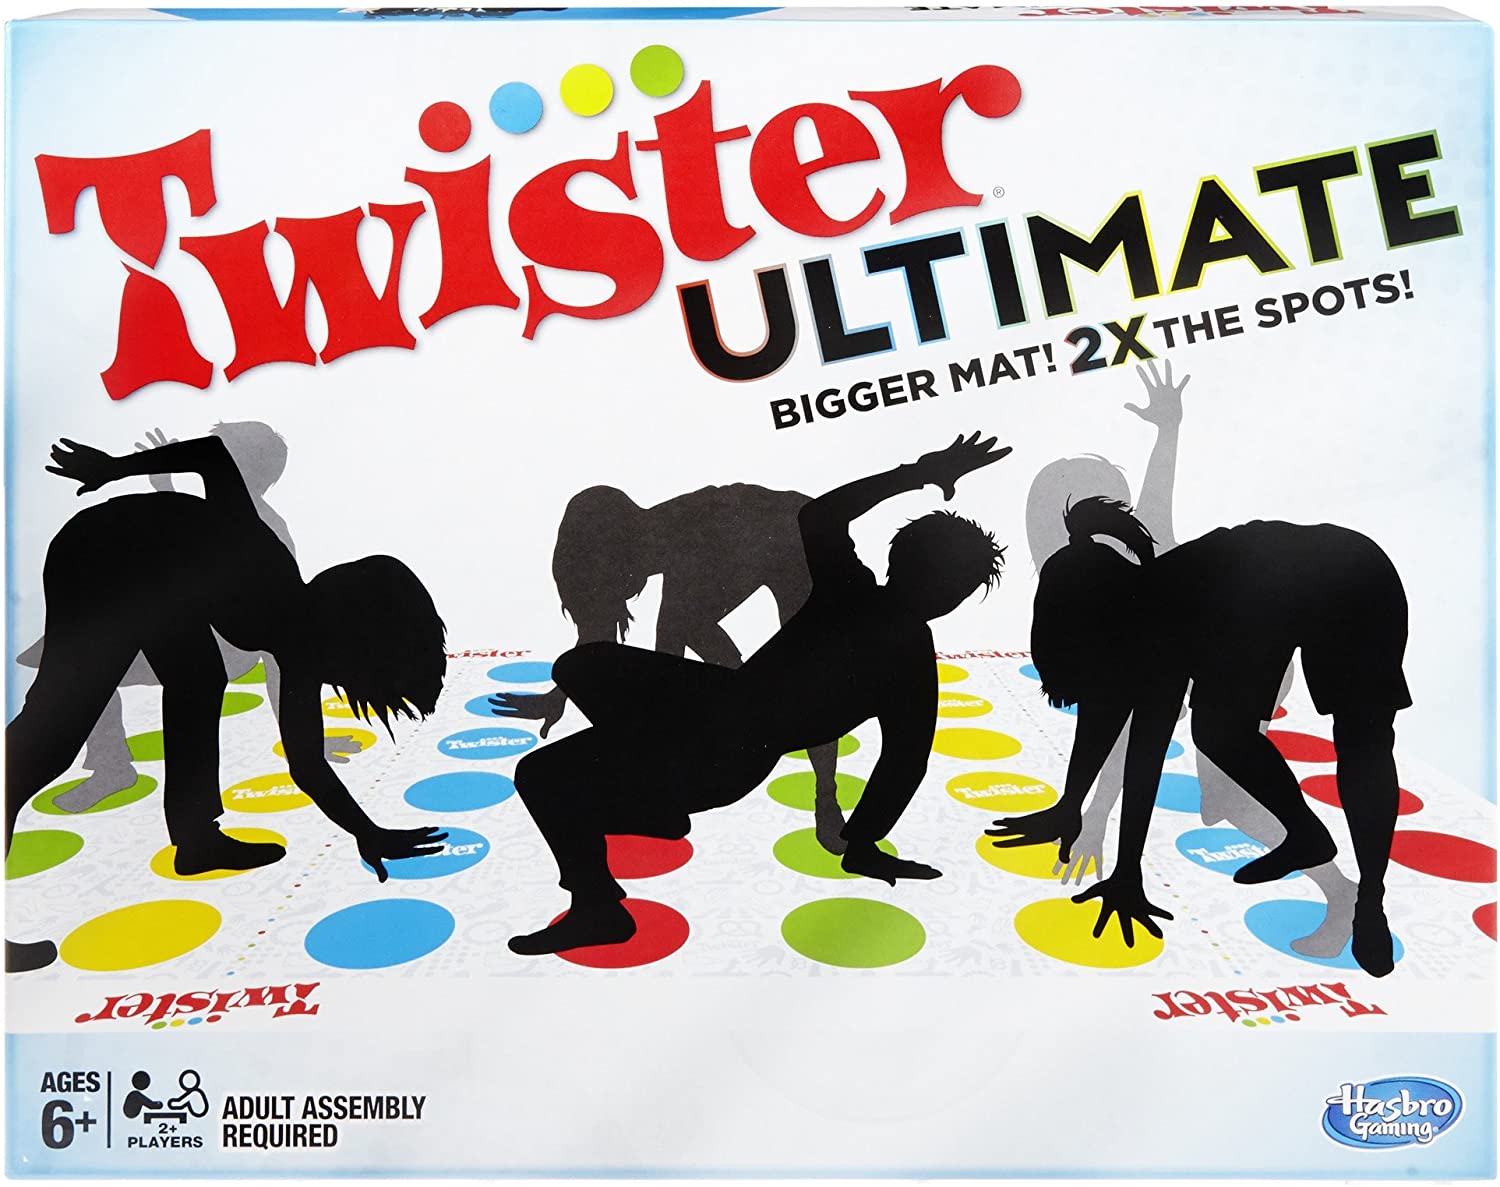 Twister Ultimate Bigger Mat, 2X The Spots! - for Ages 6 Years and Up